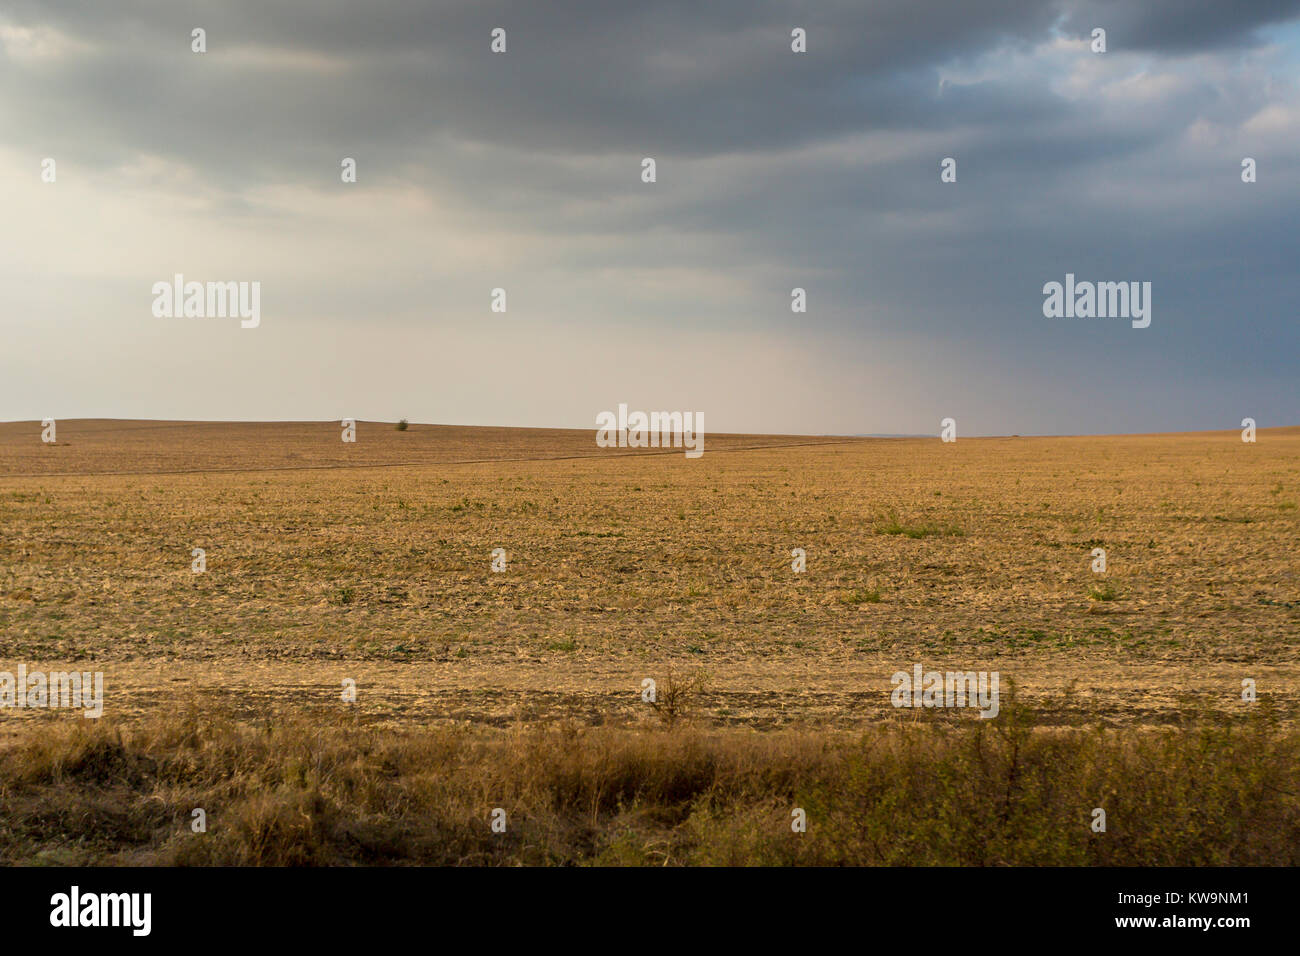 A view over a harvested grainfield with stormy clouds in the Bulgarian countryside Stock Photo